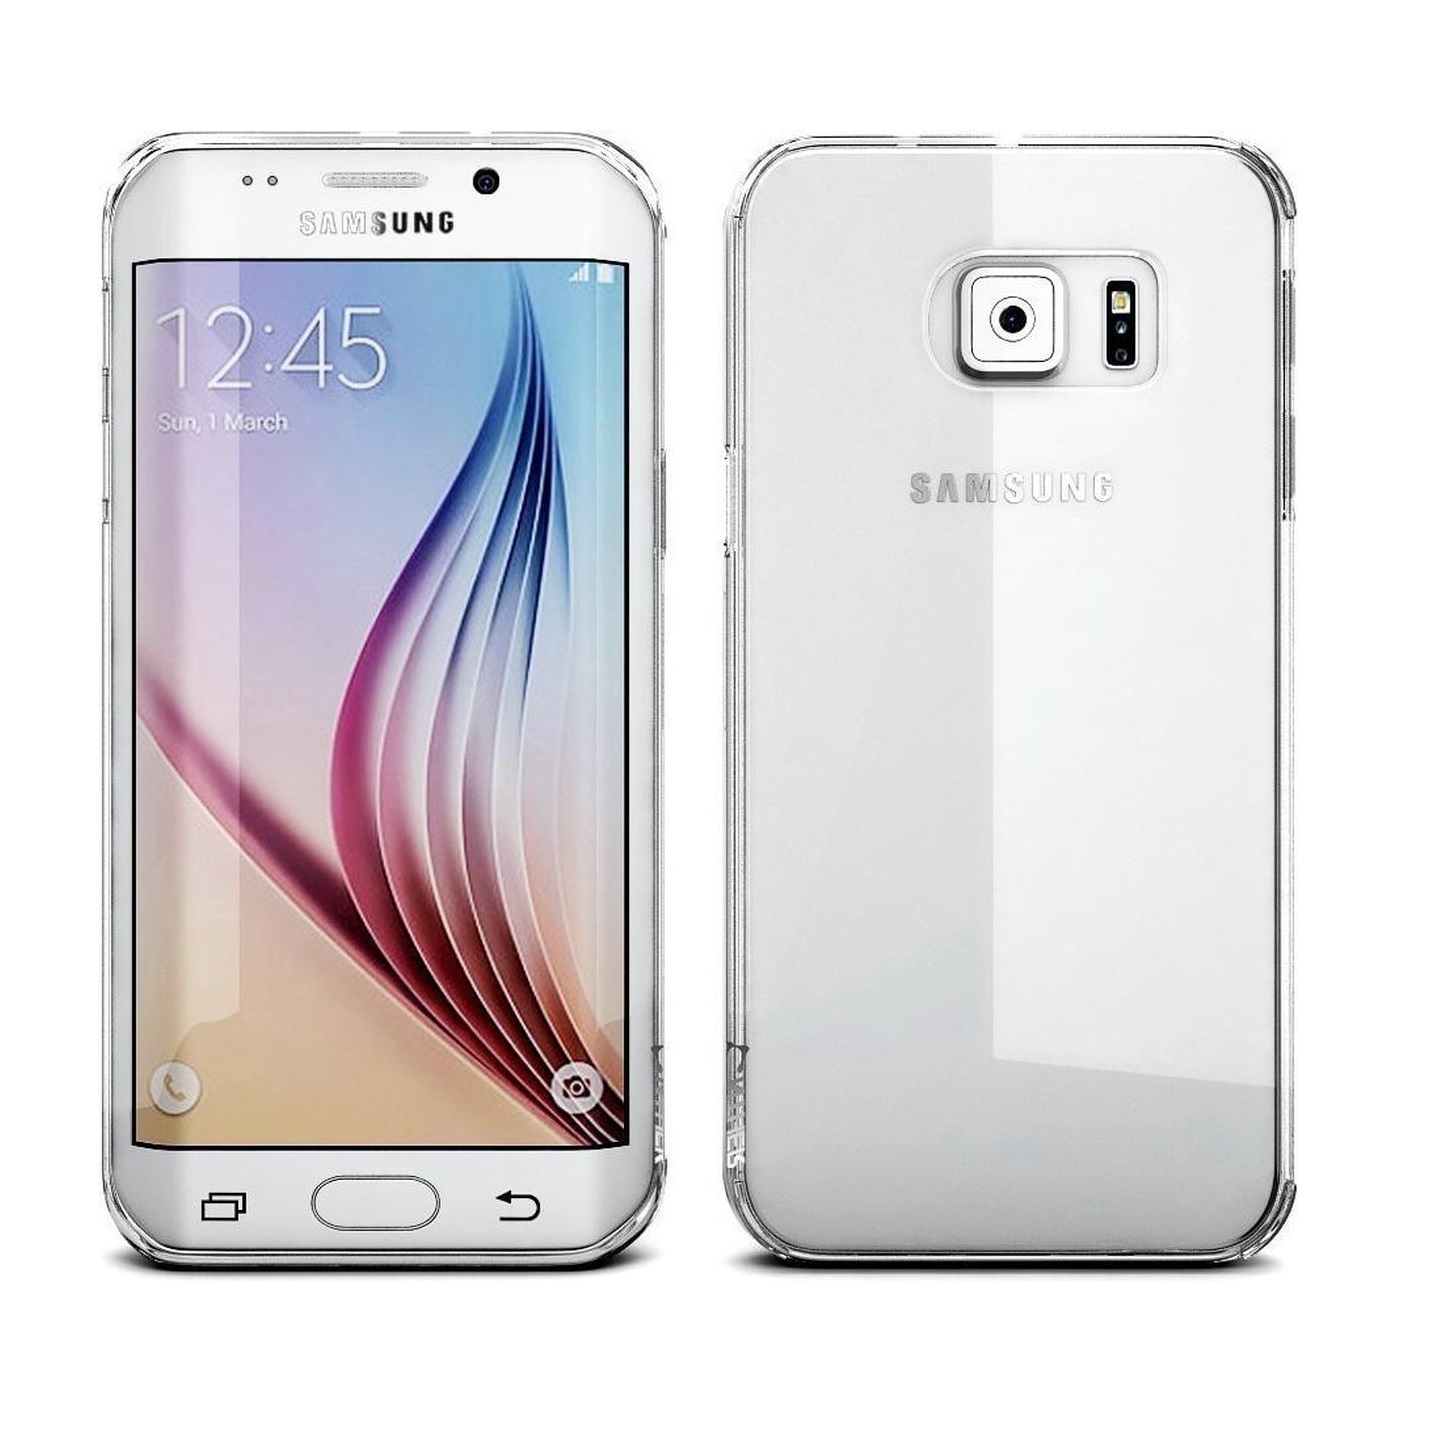 Hoesje geschikt voor Samsung Galaxy S6 Edge Plus - Silicone case - Kunststof - Soft cover - Transparant